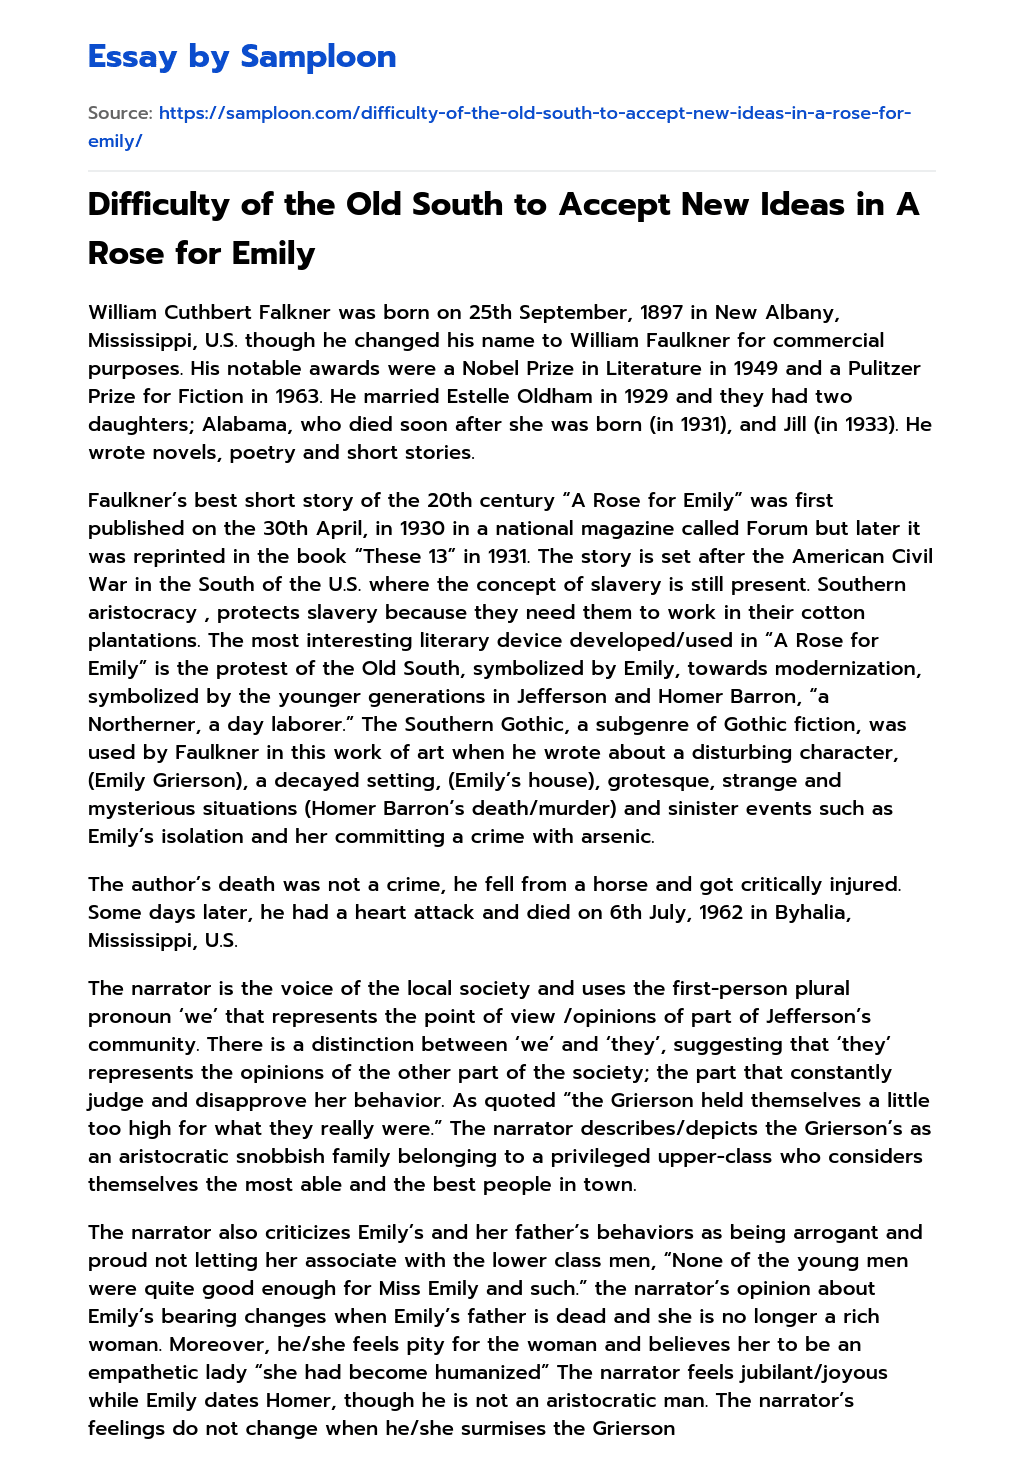 Difficulty of the Old South to Accept New Ideas in A Rose for Emily essay